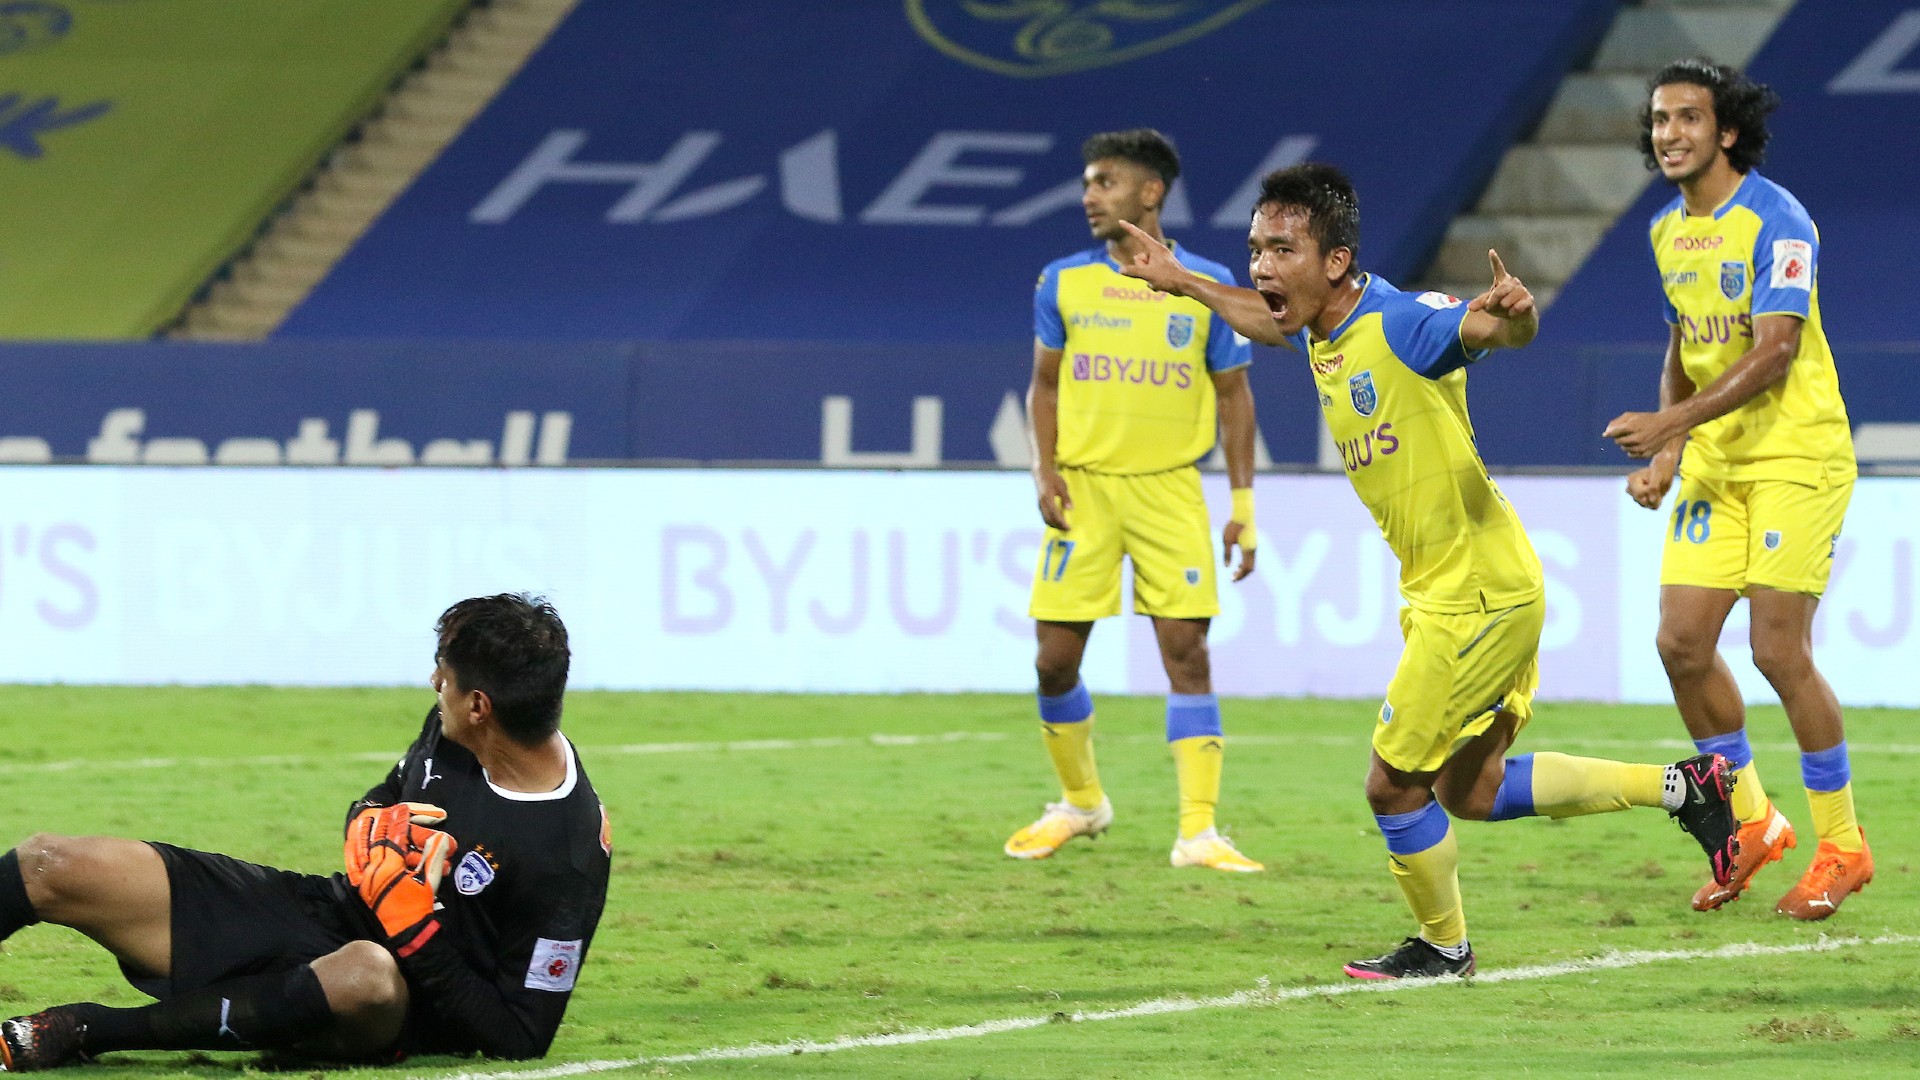 'Never give up' - Kibu Vicuna hails the attitude of Kerala Blasters players after win over Bengaluru